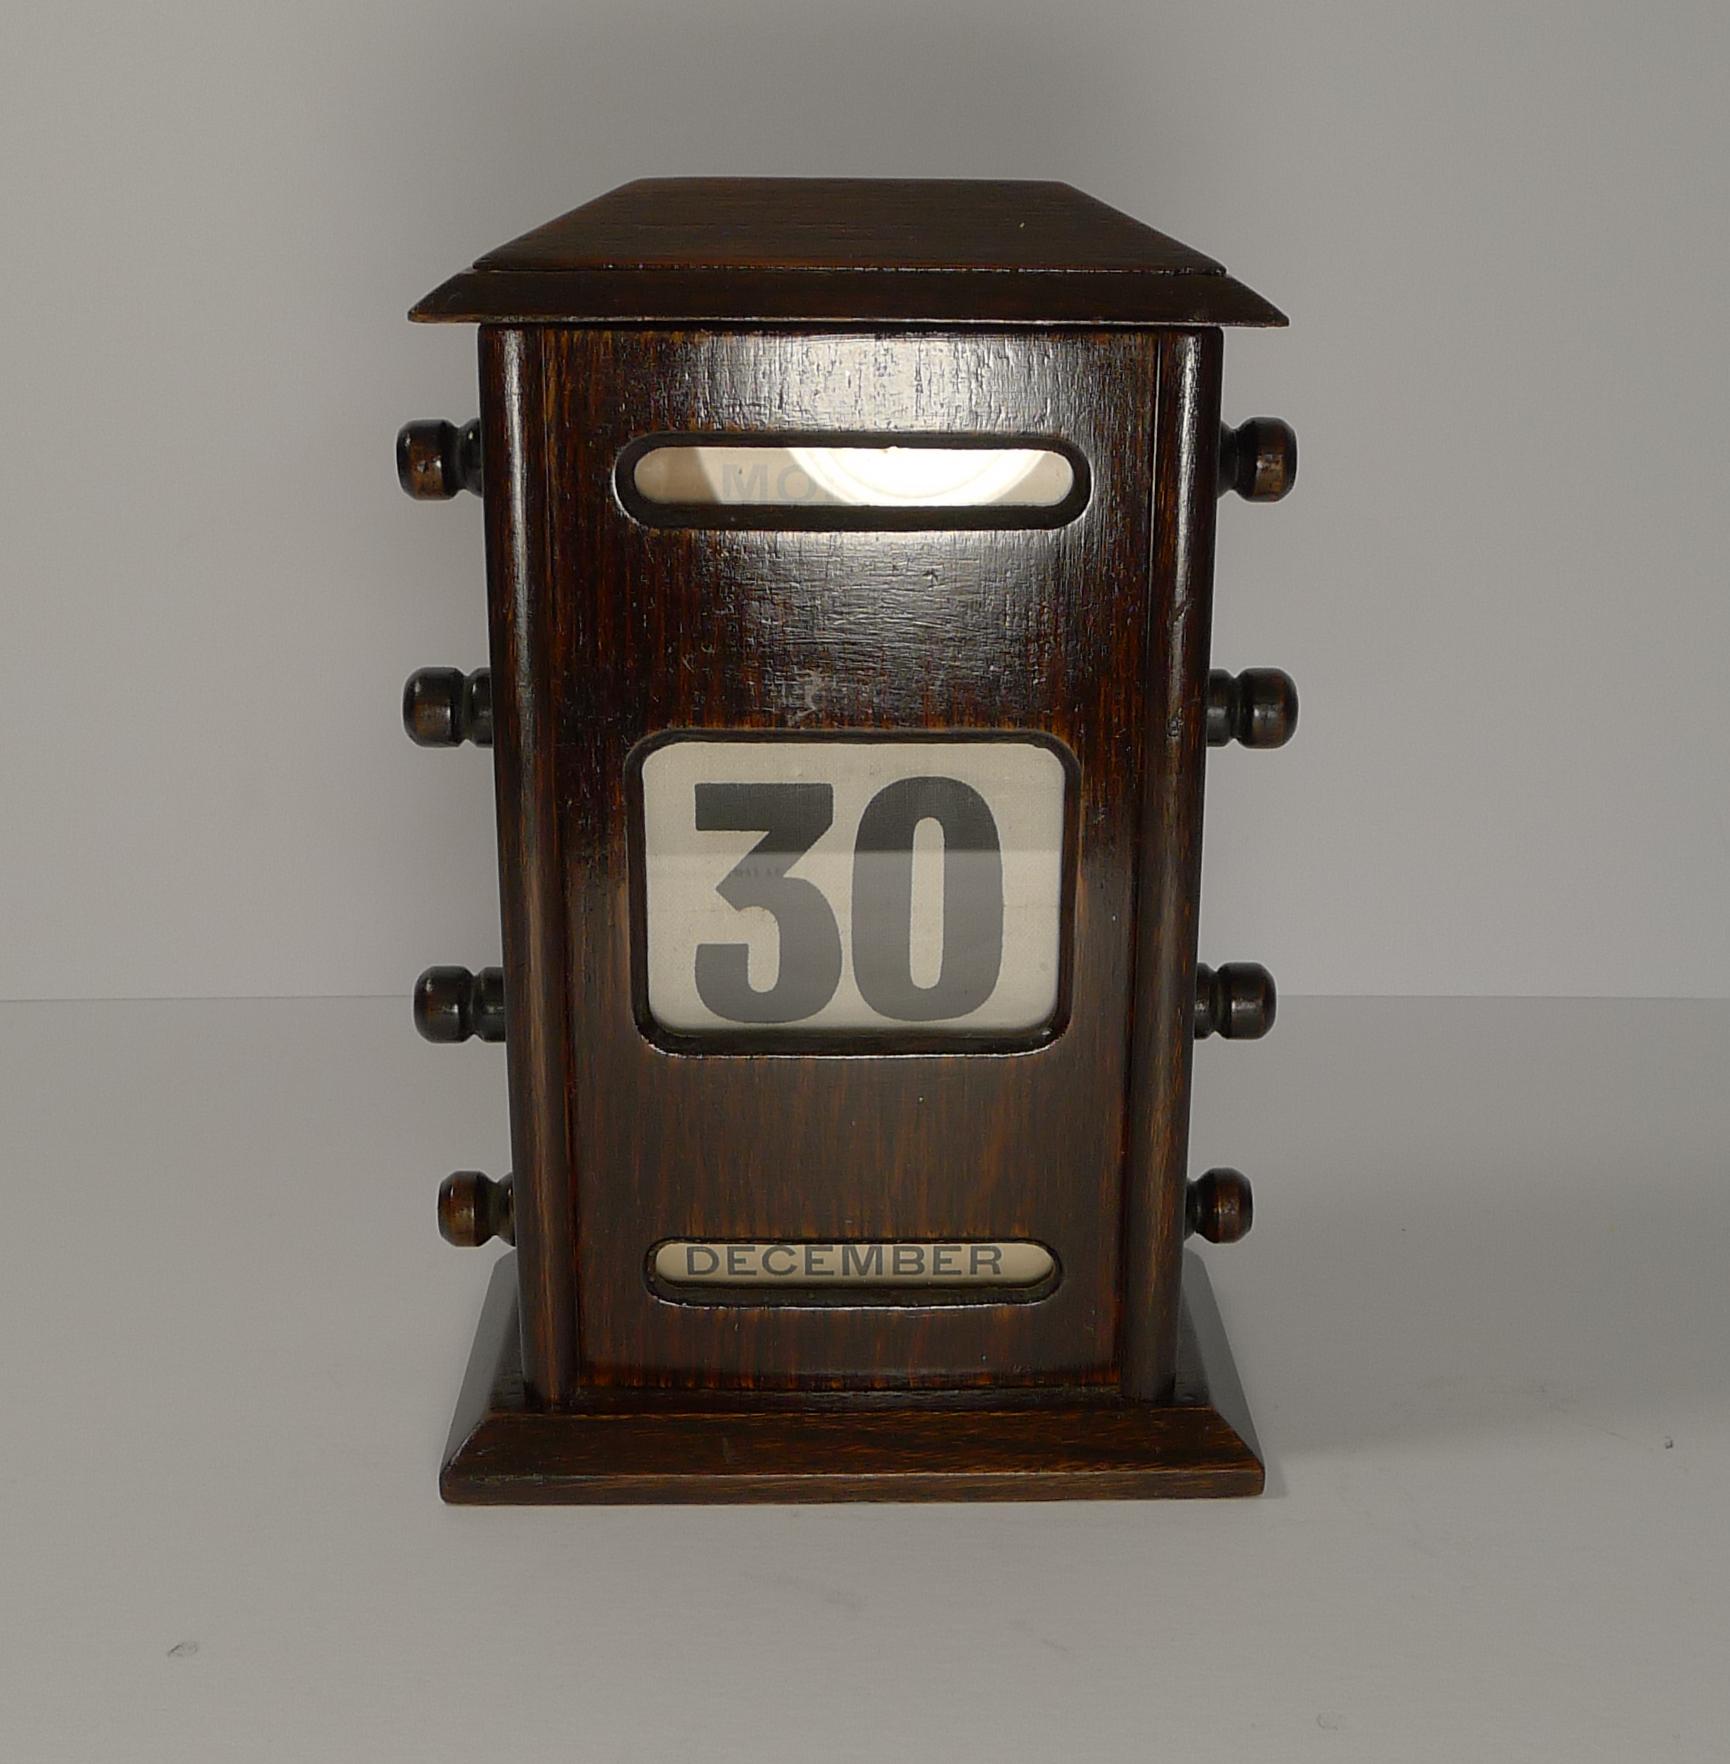 A good sized Edwardian oak perpetual calendar dating to circa 1900.

The keys to the sides are used to forward and rewind the day, date and month behind the glass panel.

Dating to circa 1900, it remains in excellent working condition. Measures: